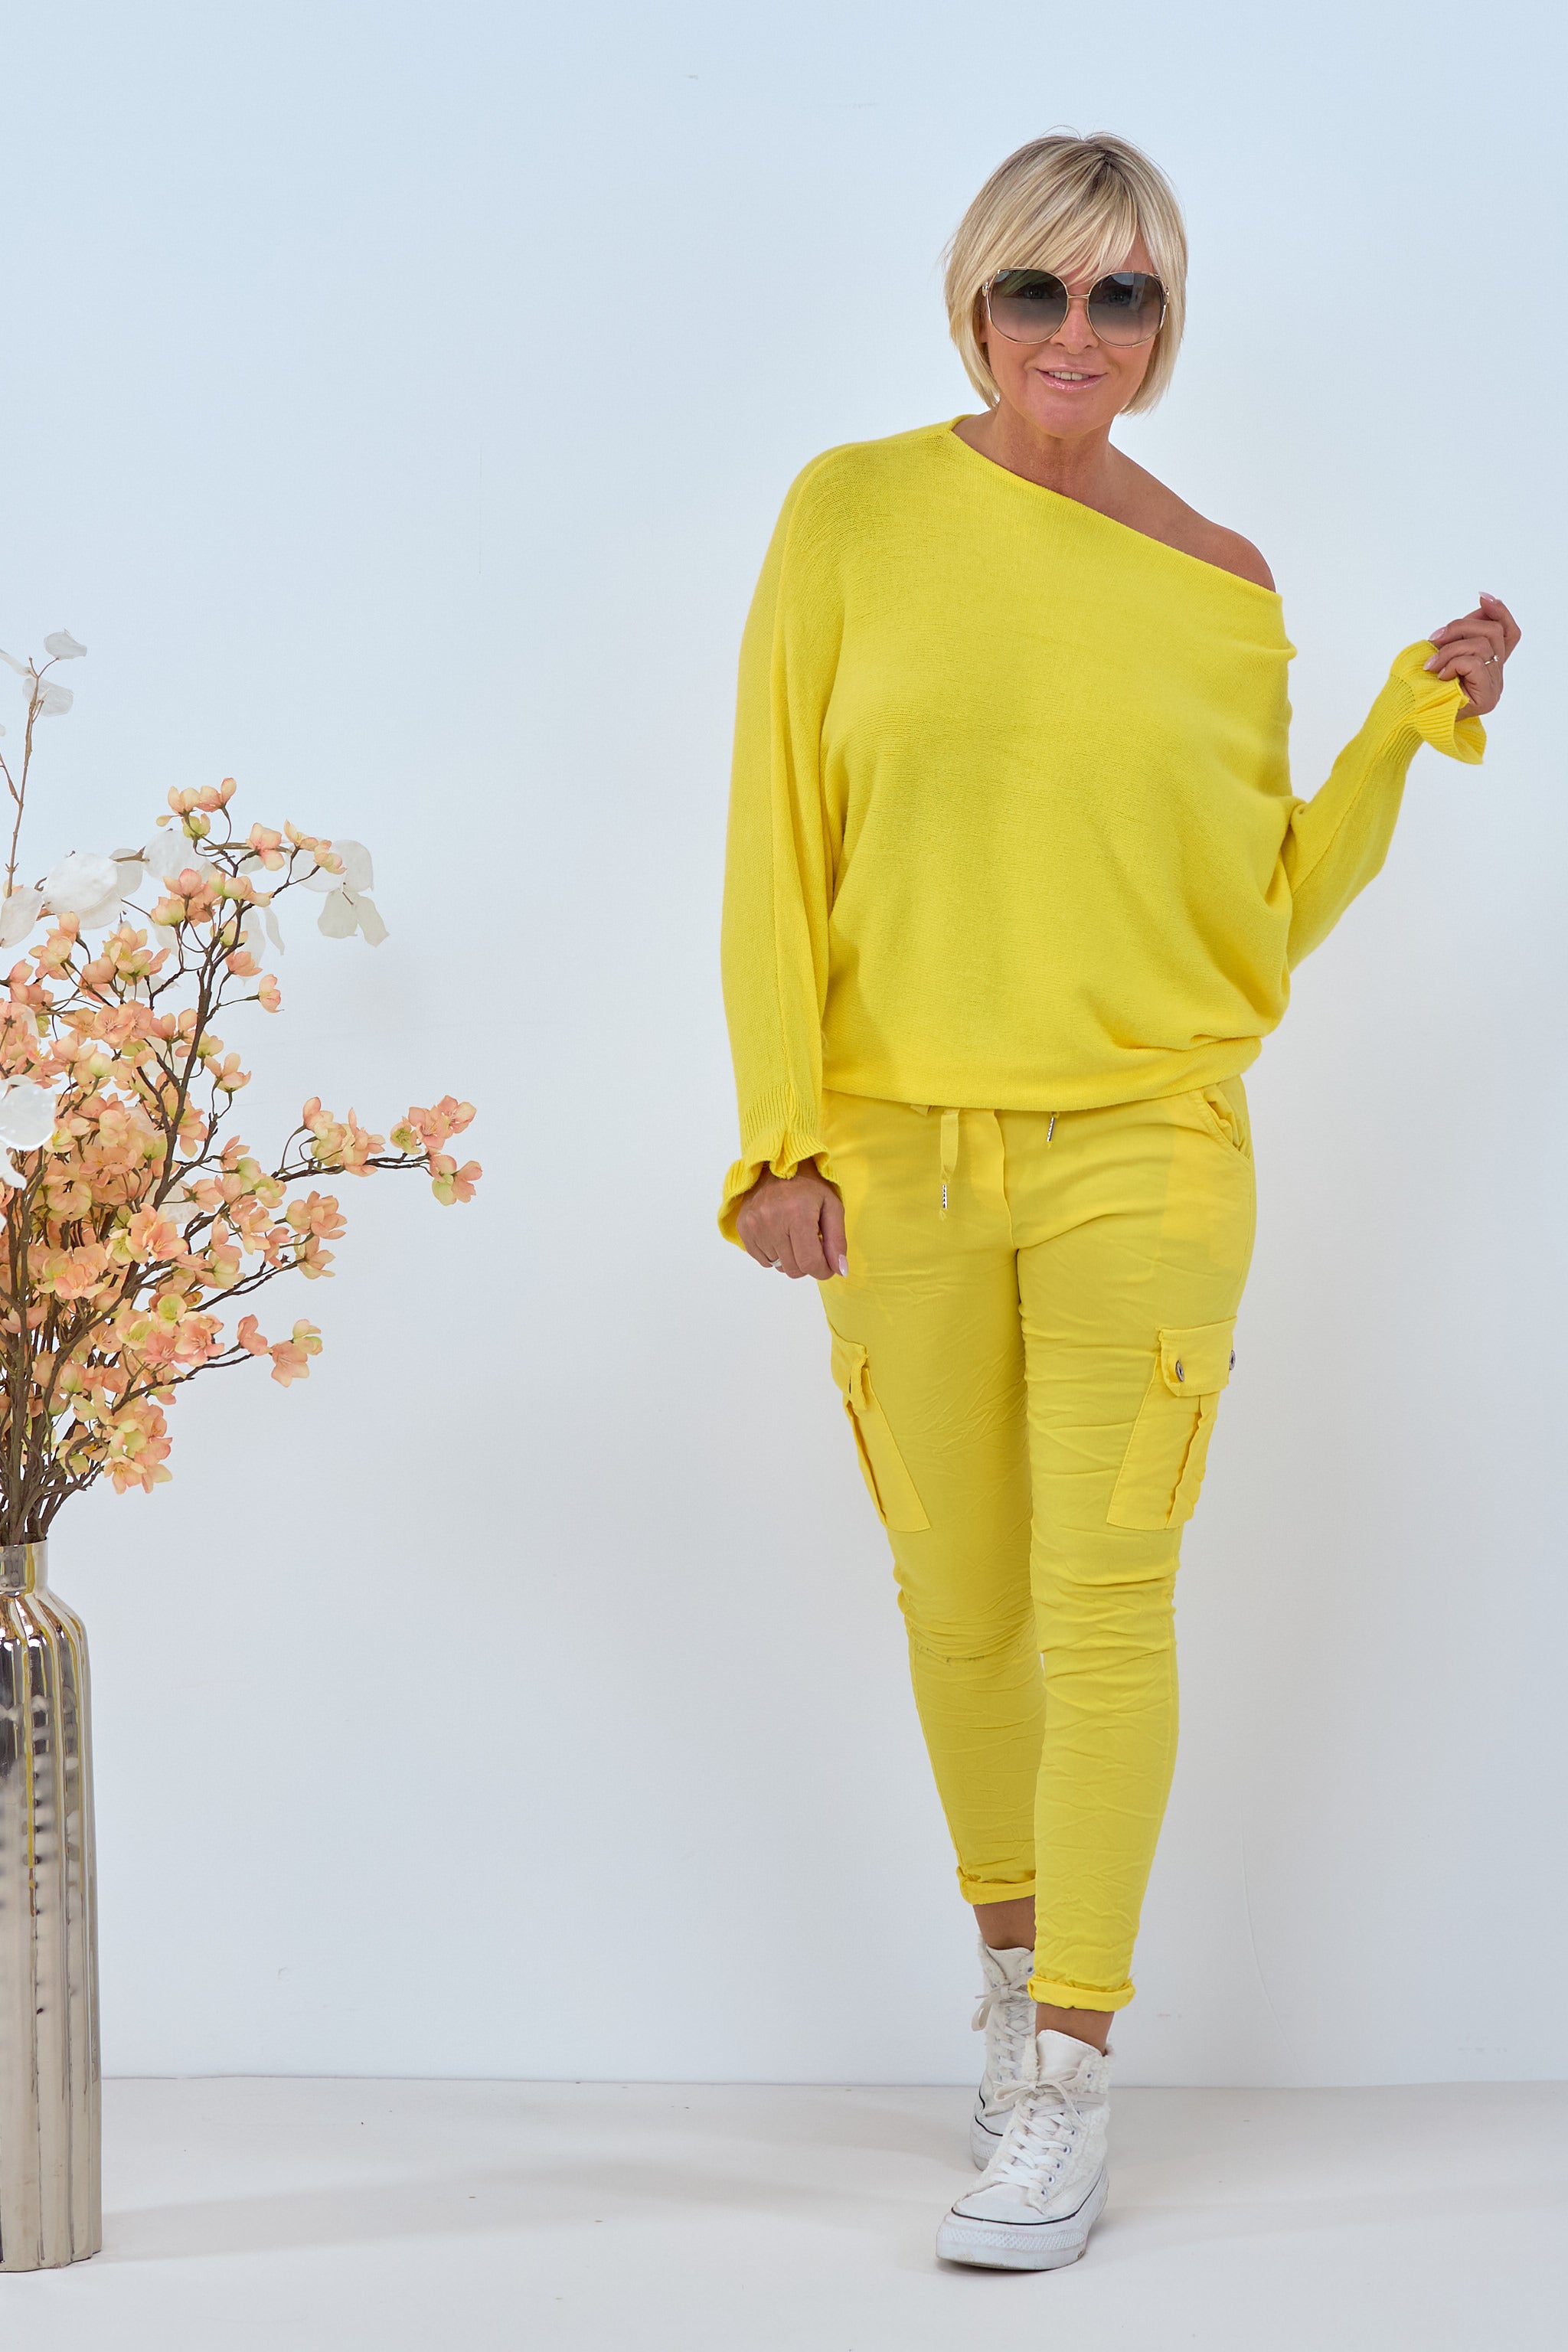 Sweater with batwing sleeves, yellow